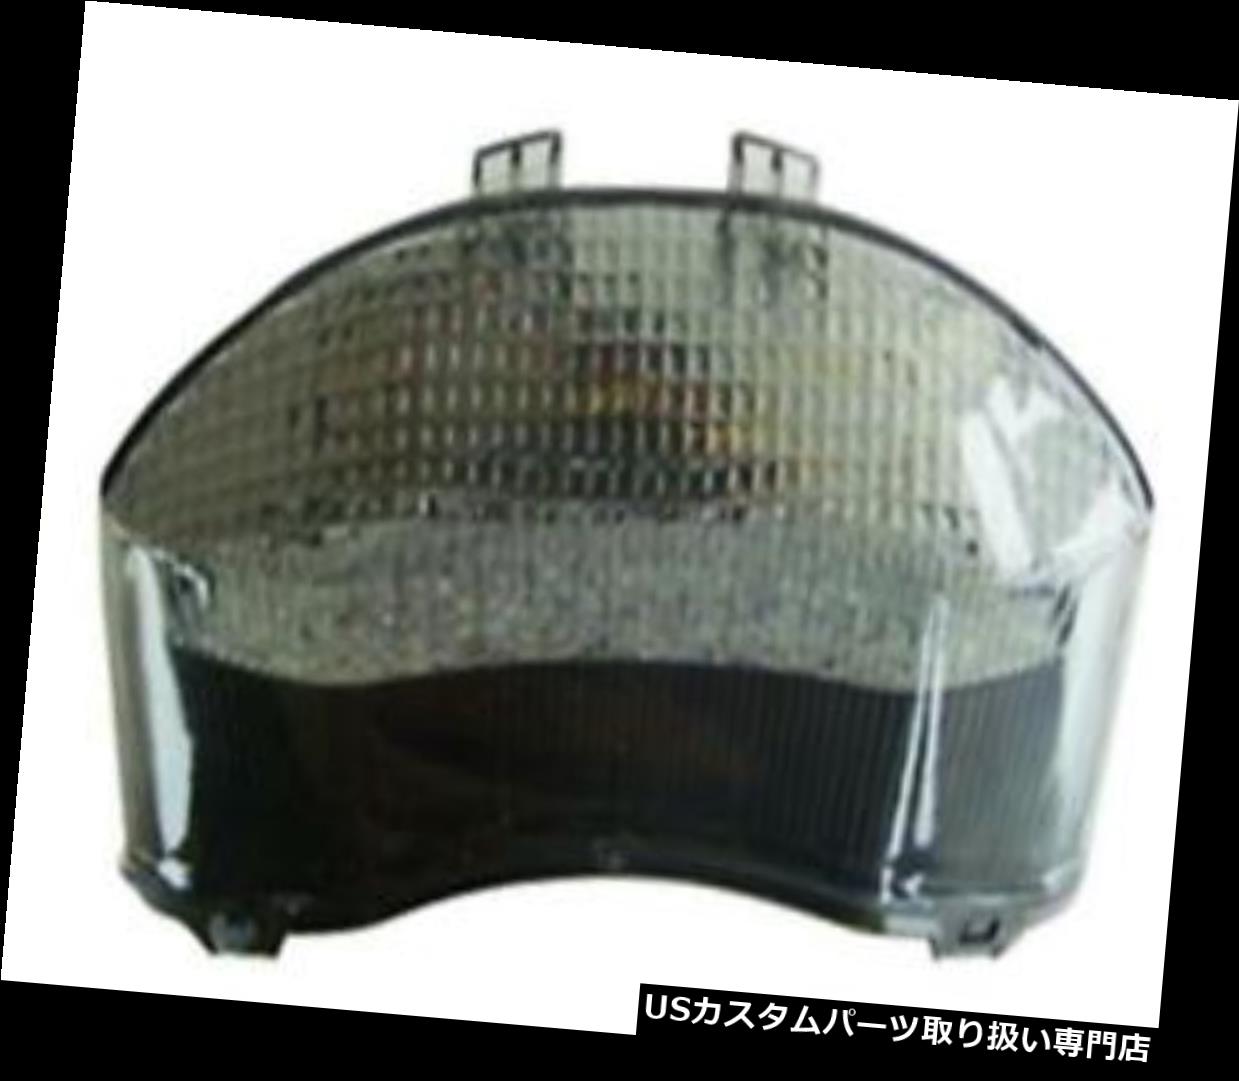 USテールライト アドバンスド照明デザインTL-0905-IT統合テールライト - クリア Advanced Lighting Designs TL-0905-IT Integrated Taillight - Clear